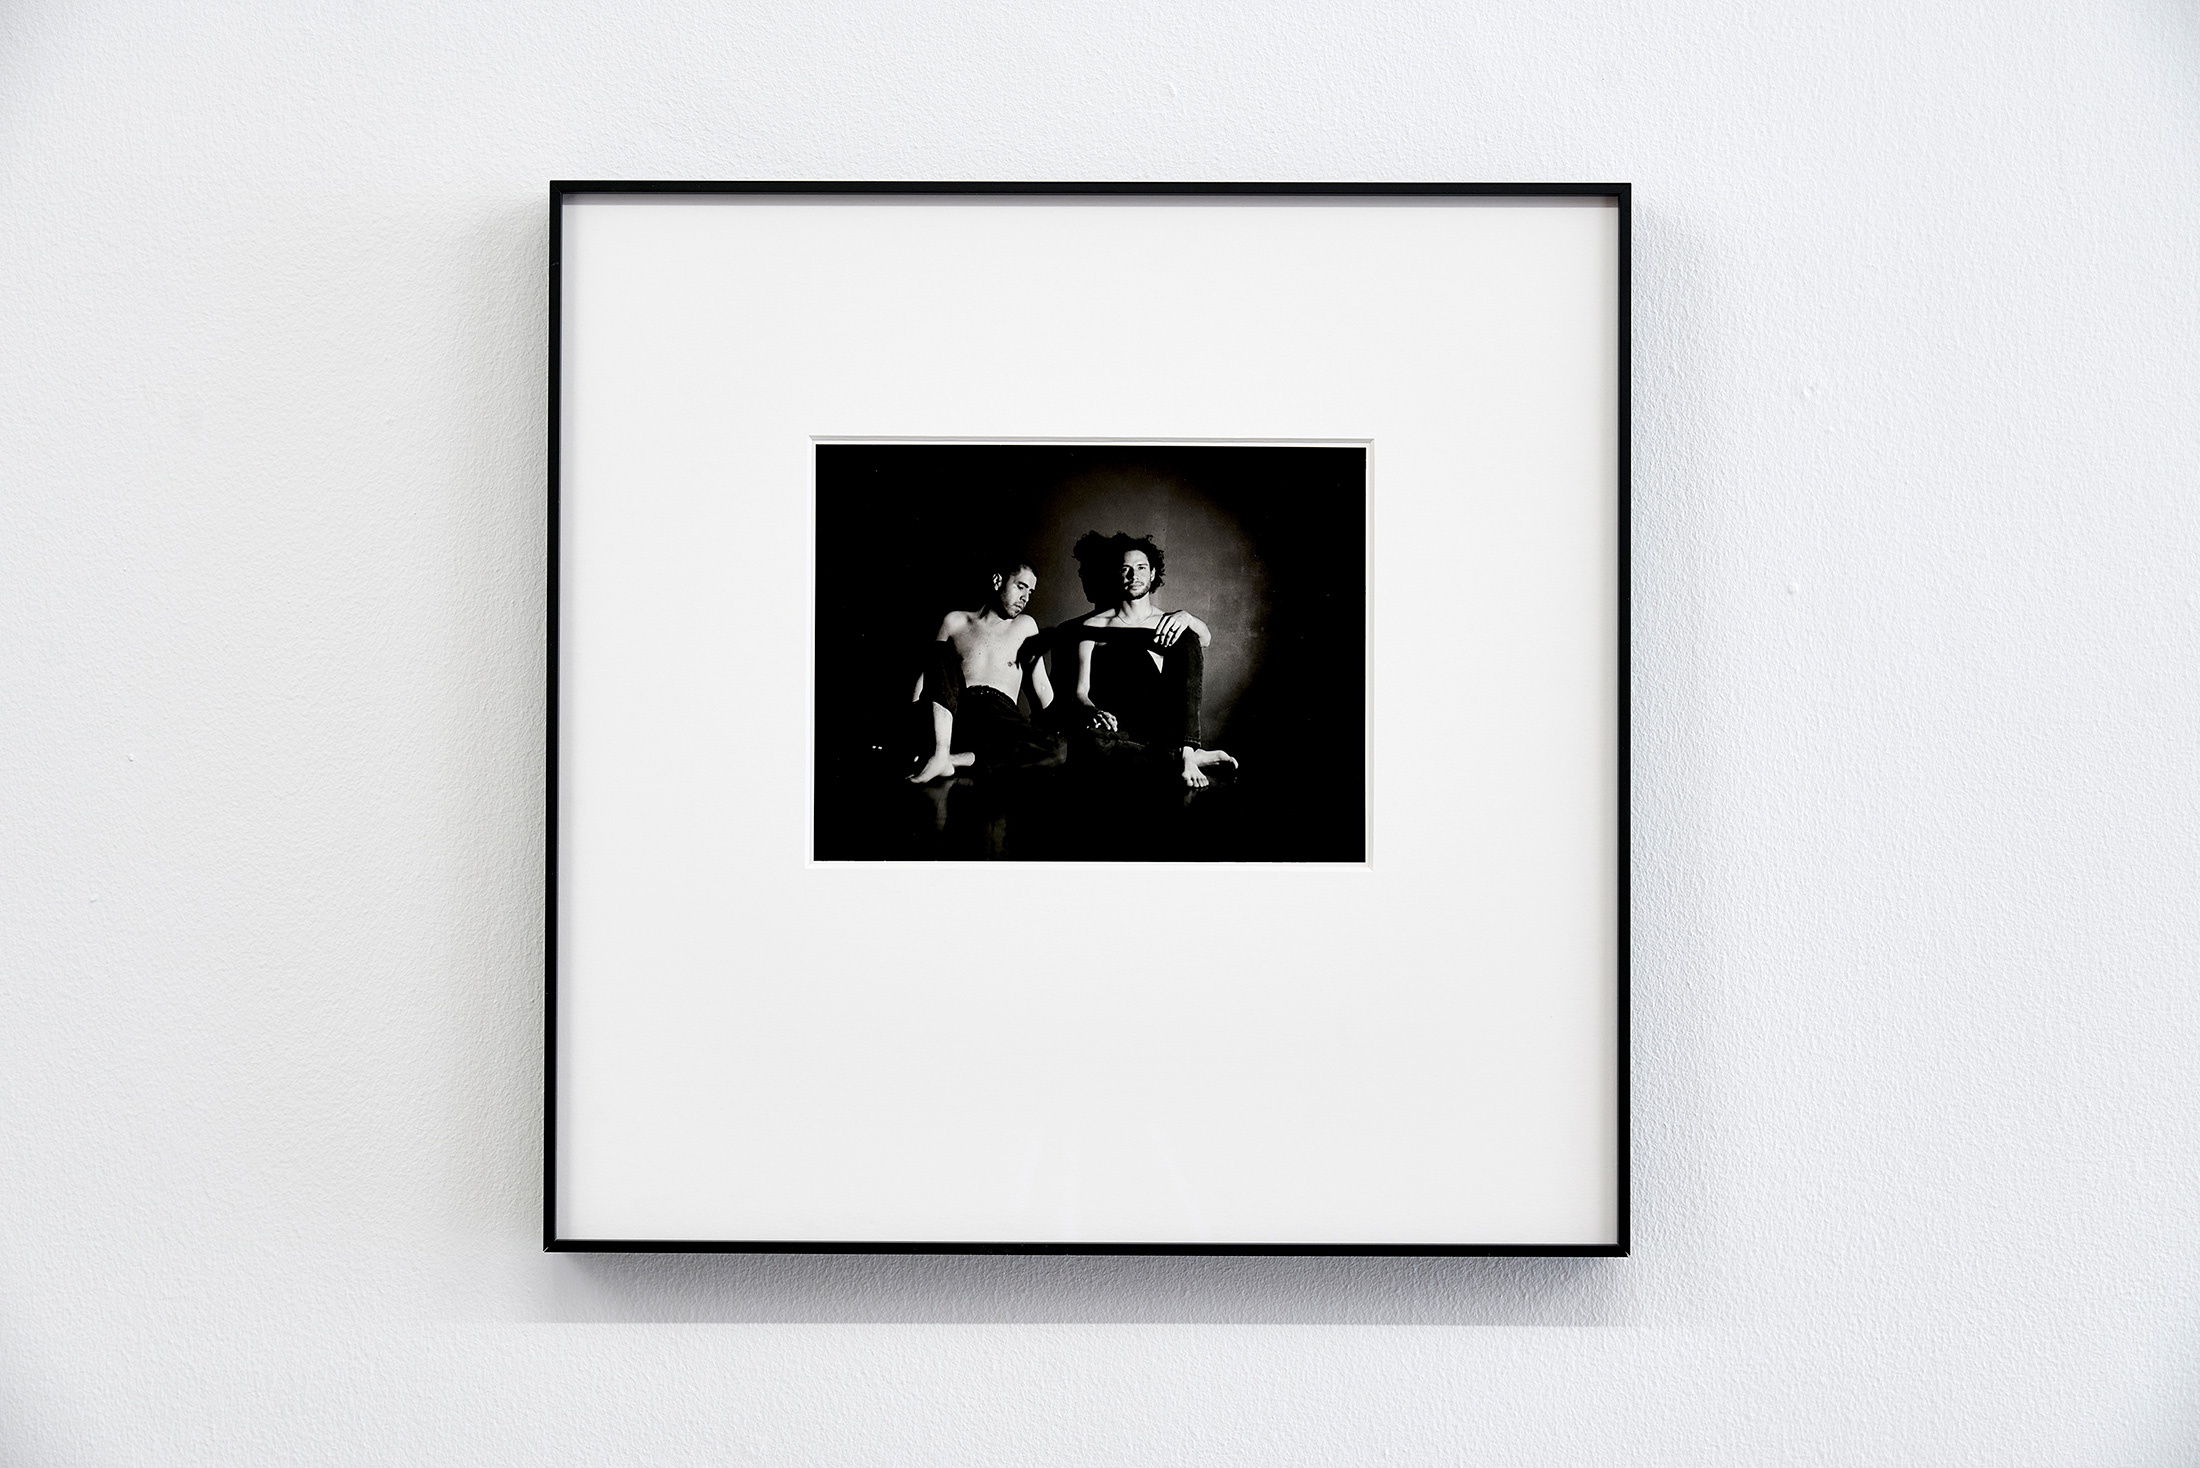 Installation photograph that shows Pedro Slim’s untitled framed monochrome photograph mounted on a white wall.
